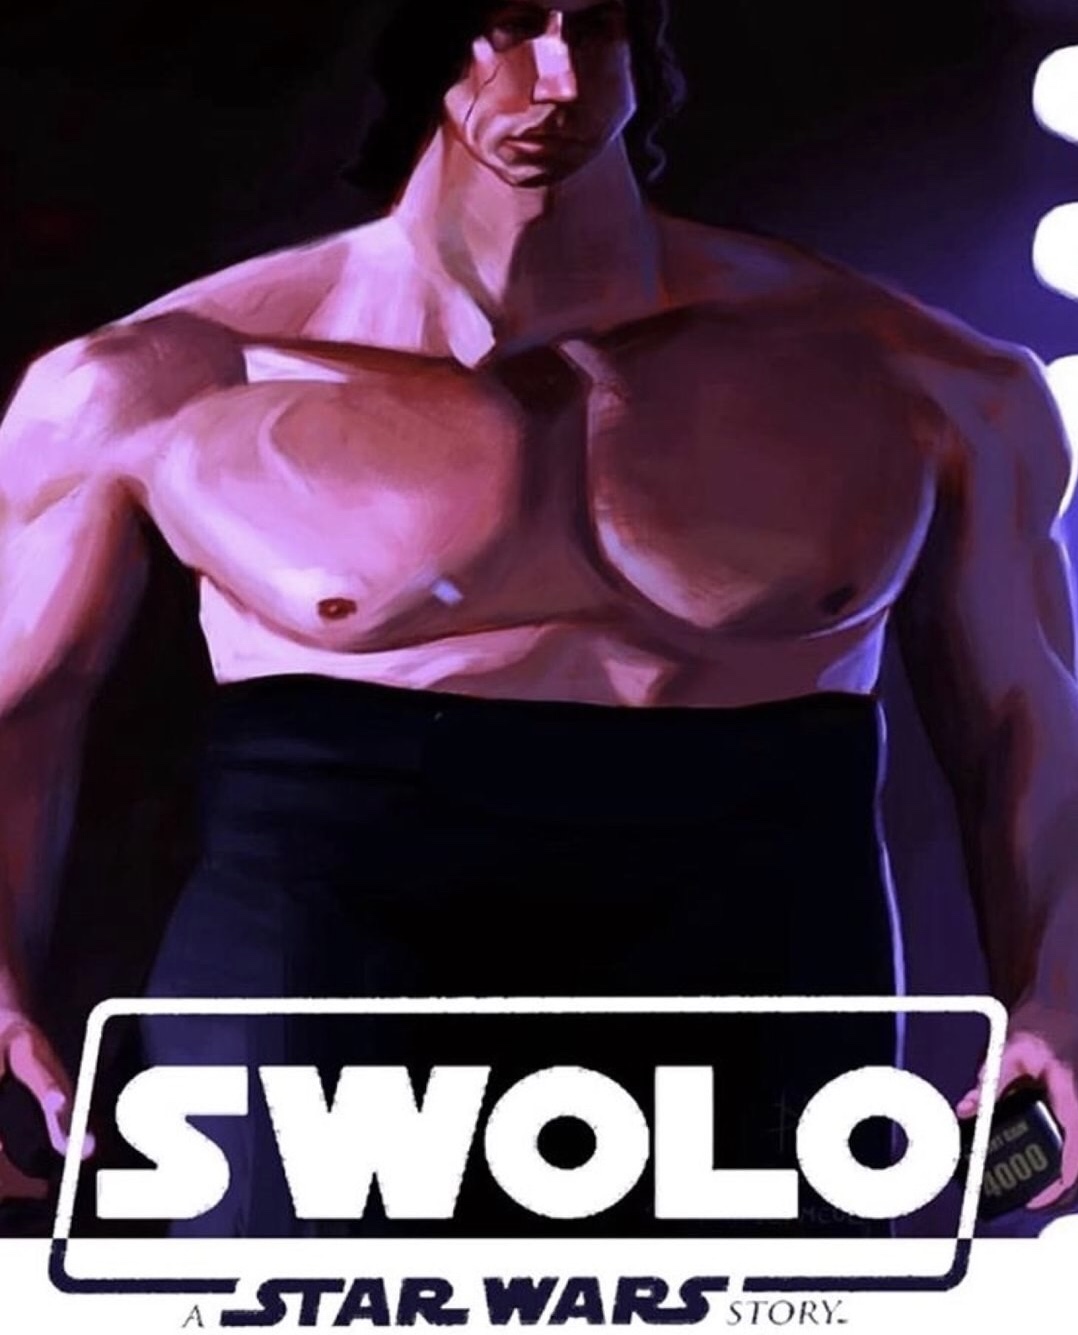 Monday meme with Kylo Ren painted as a large muscular figure